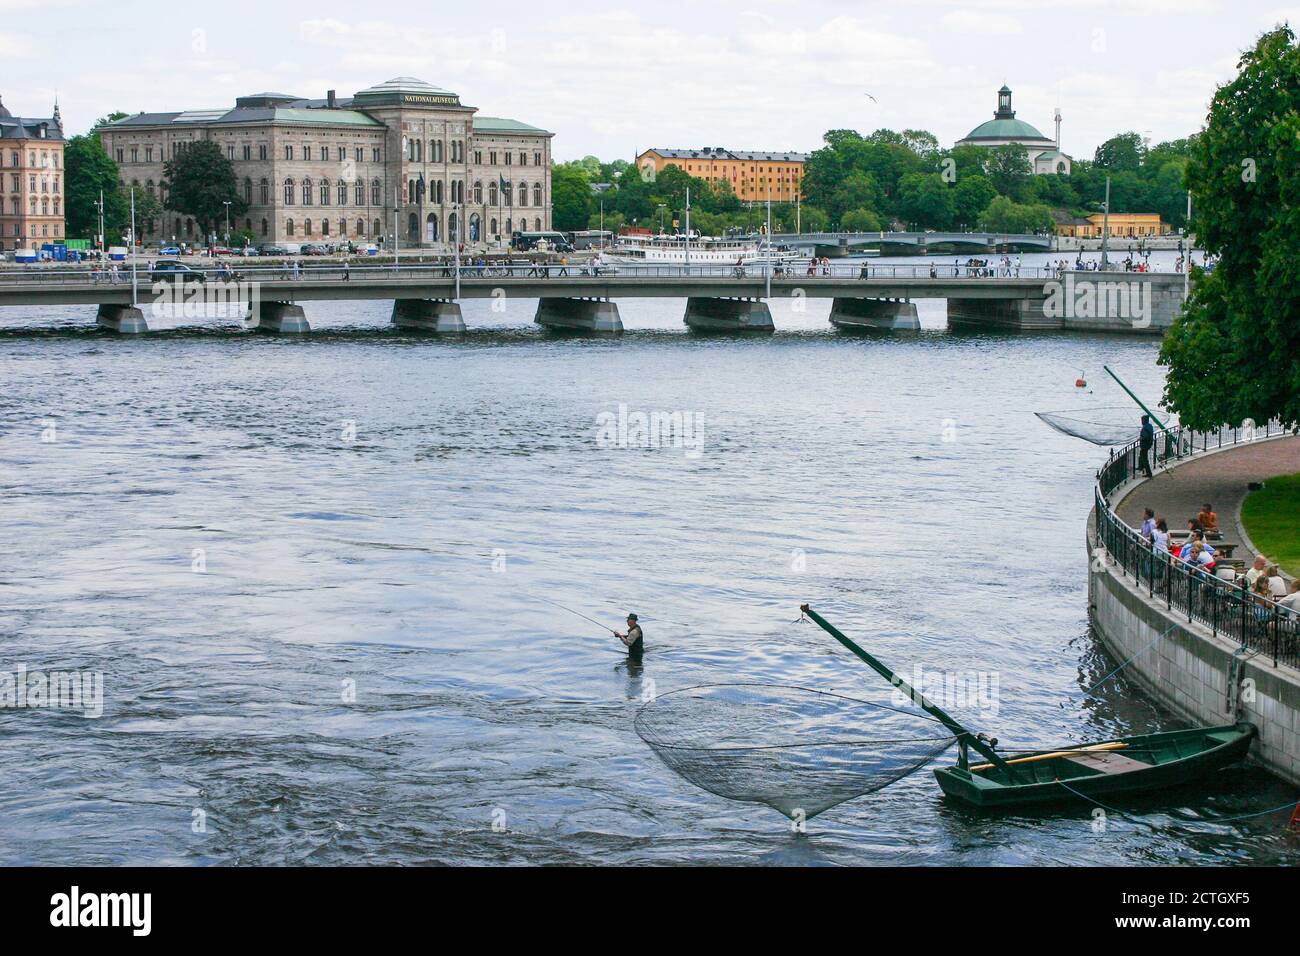 RECREATIONAL FISHING man standing in the water of Stockholm downside Royals palace Stock Photo